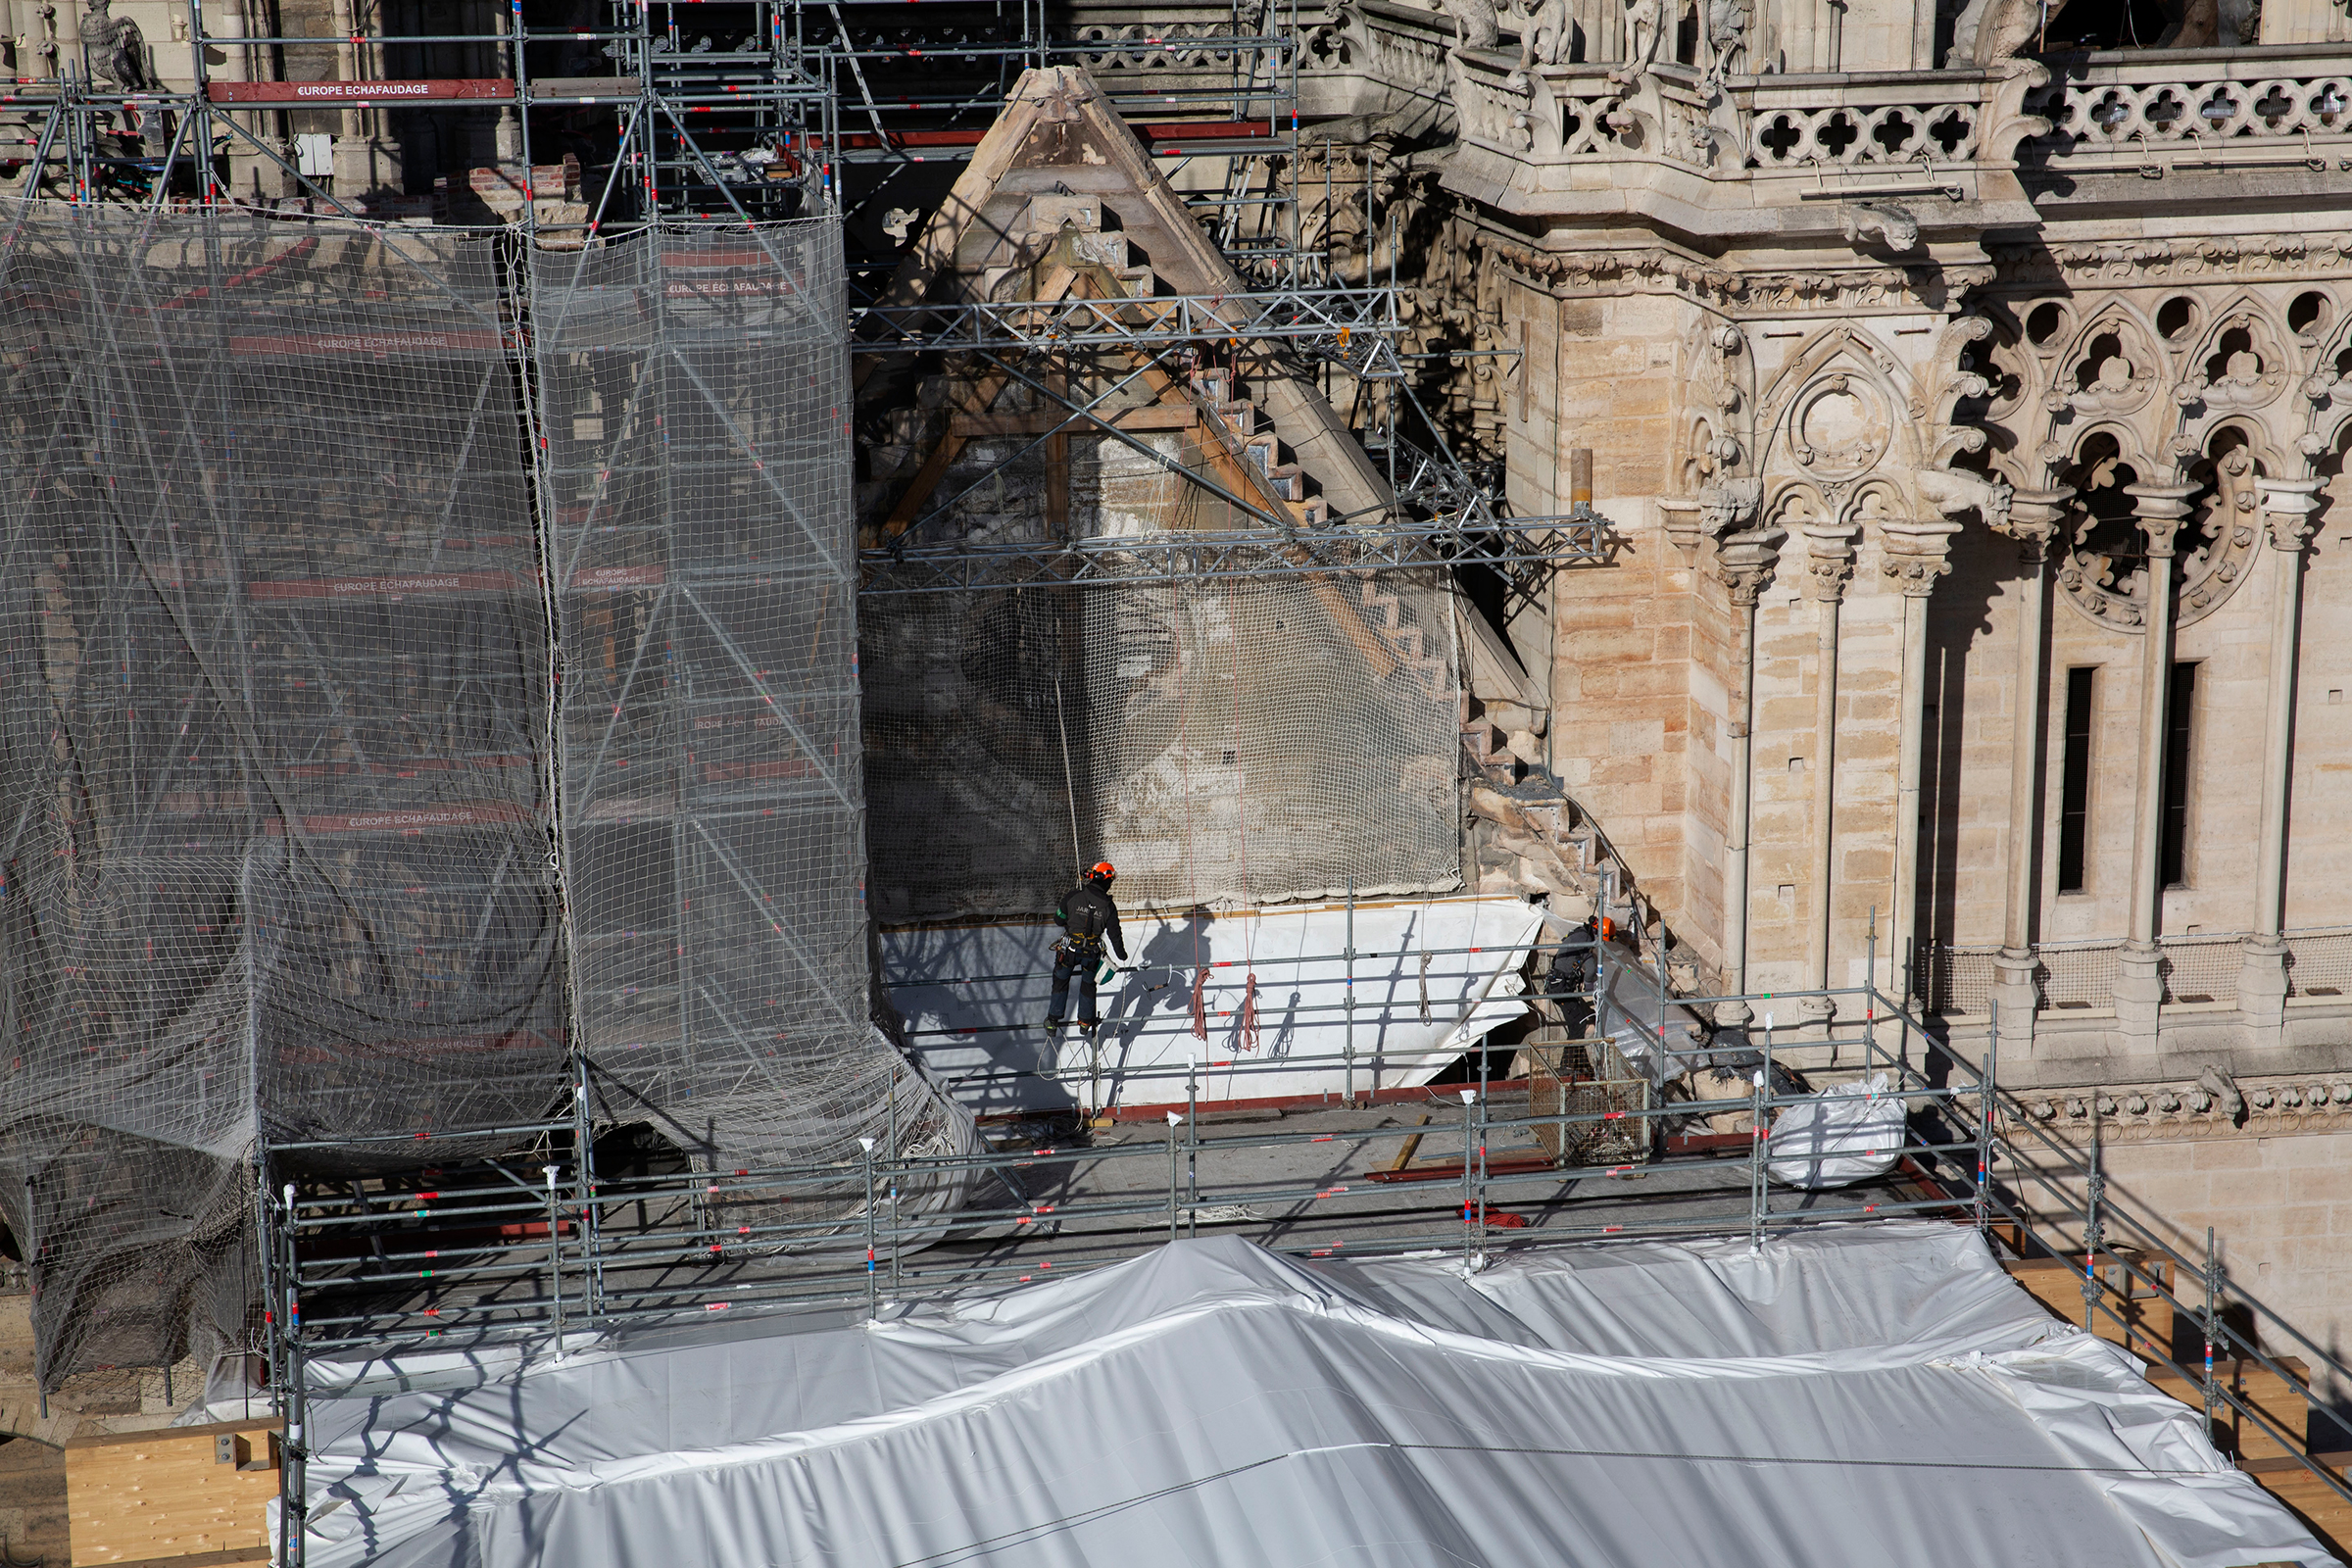 Macron's ambitious time frame for reopening Notre-Dame, seen in February, galvanized people into action and brought pledges of nearly a billion euros in donations for the reconstruction.